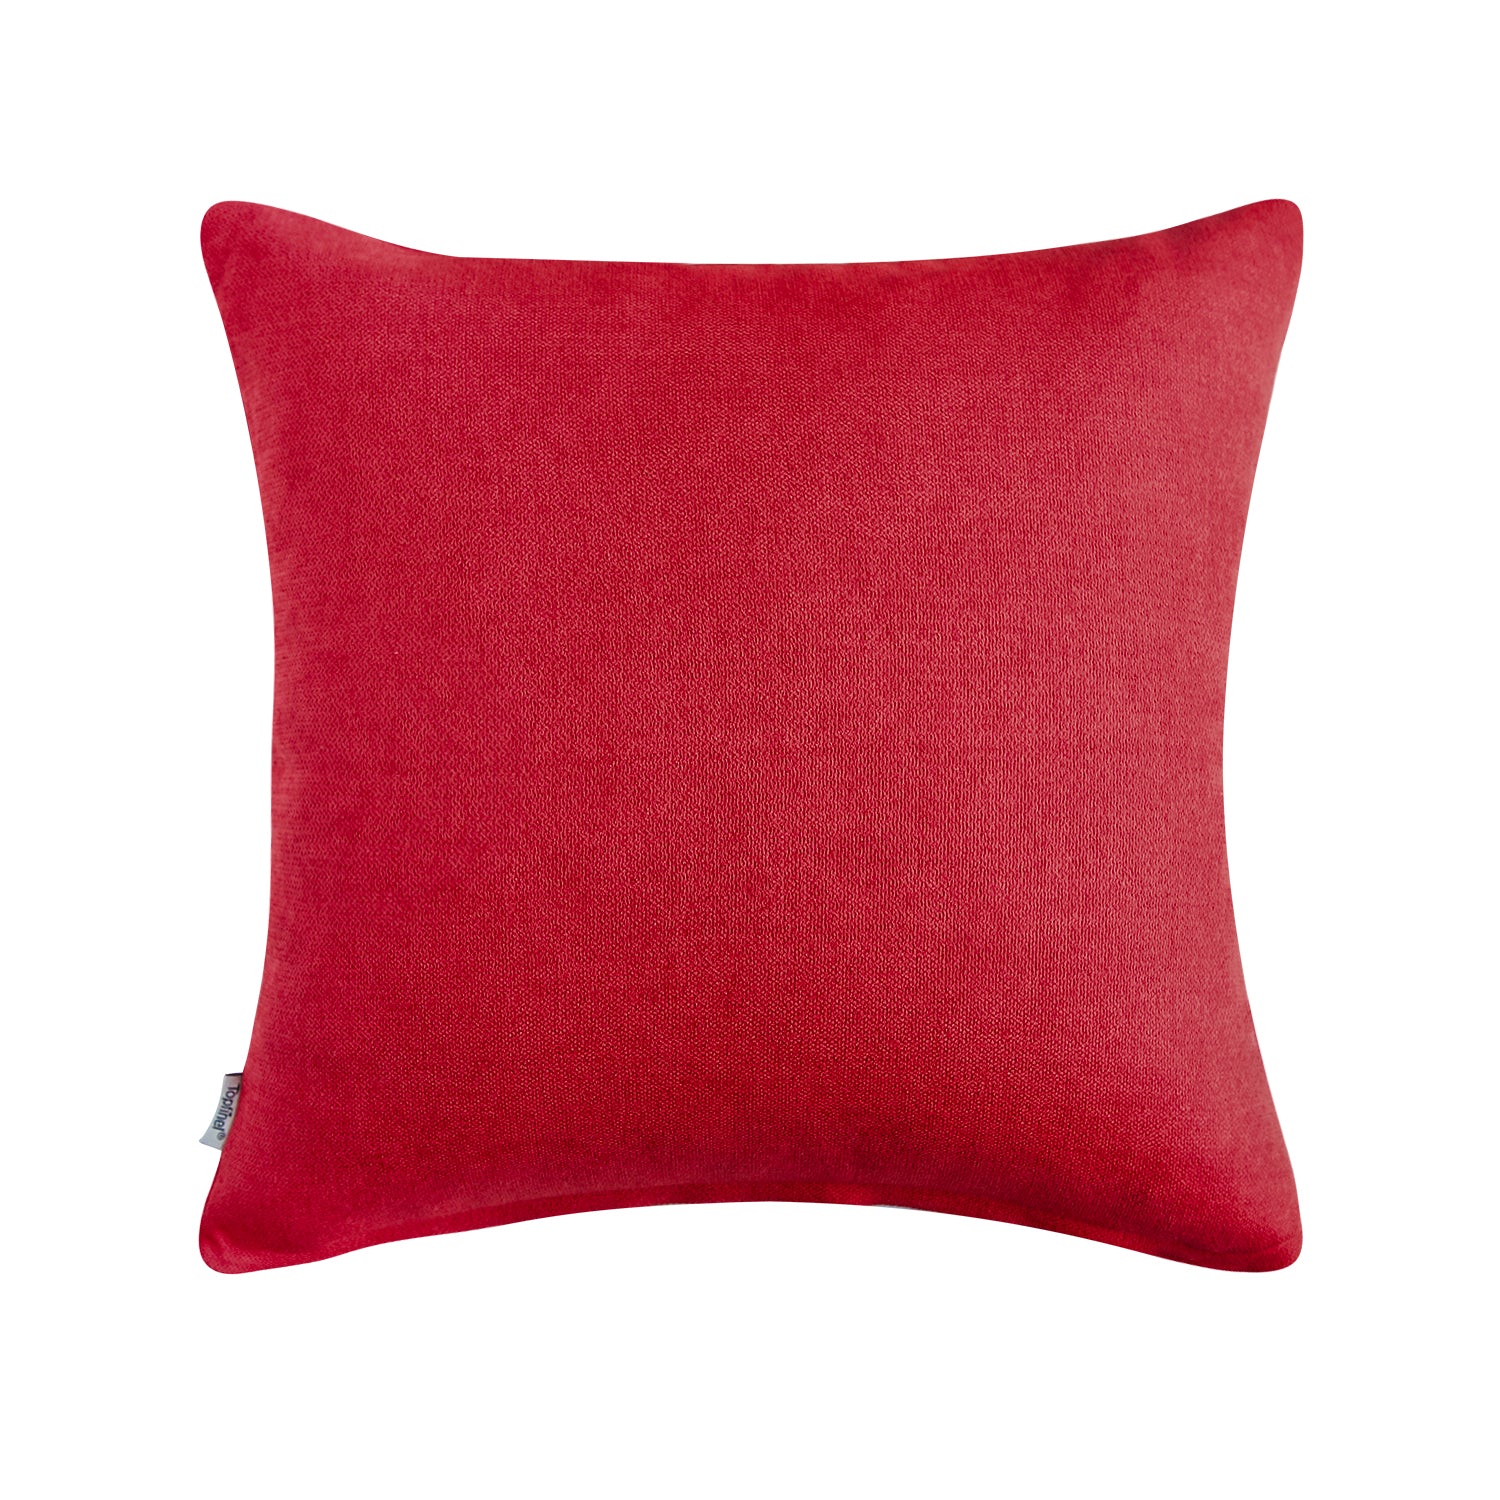 Chenille Outdoor Decorative Throw Pillow Covers